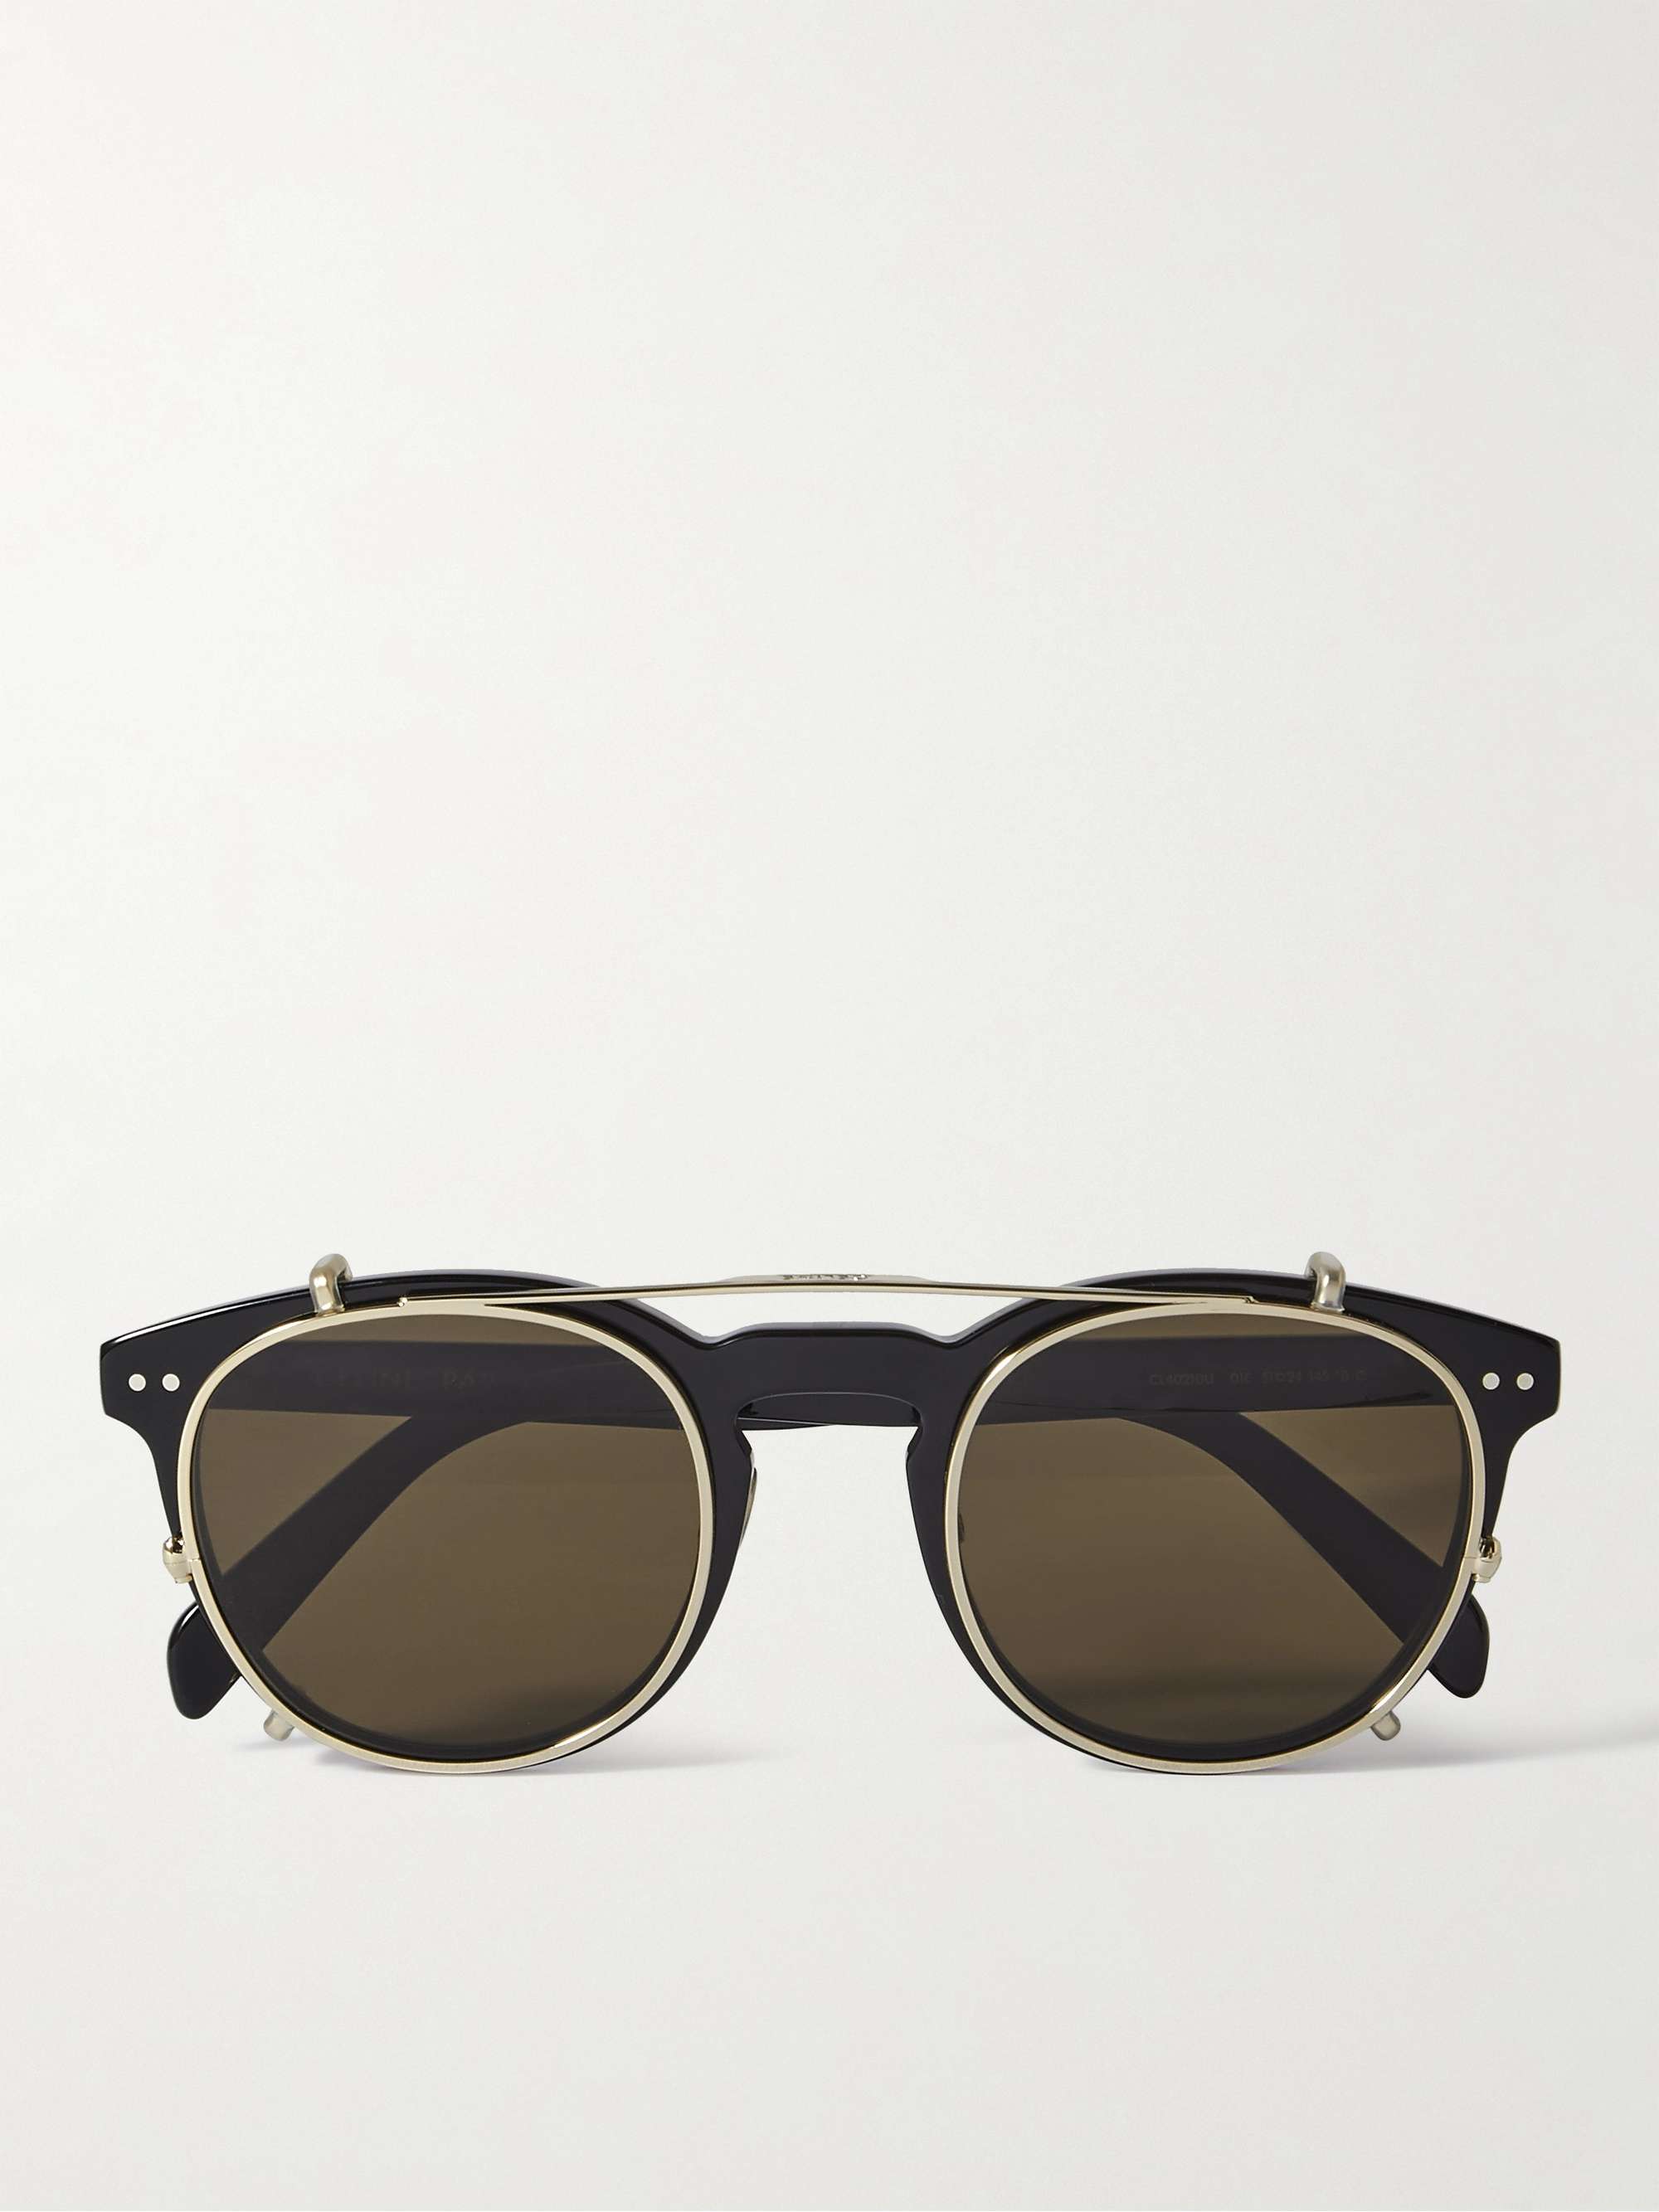 CELINE HOMME Convertible Round-Frame Acetate and Gold-Tone Optical Glasses